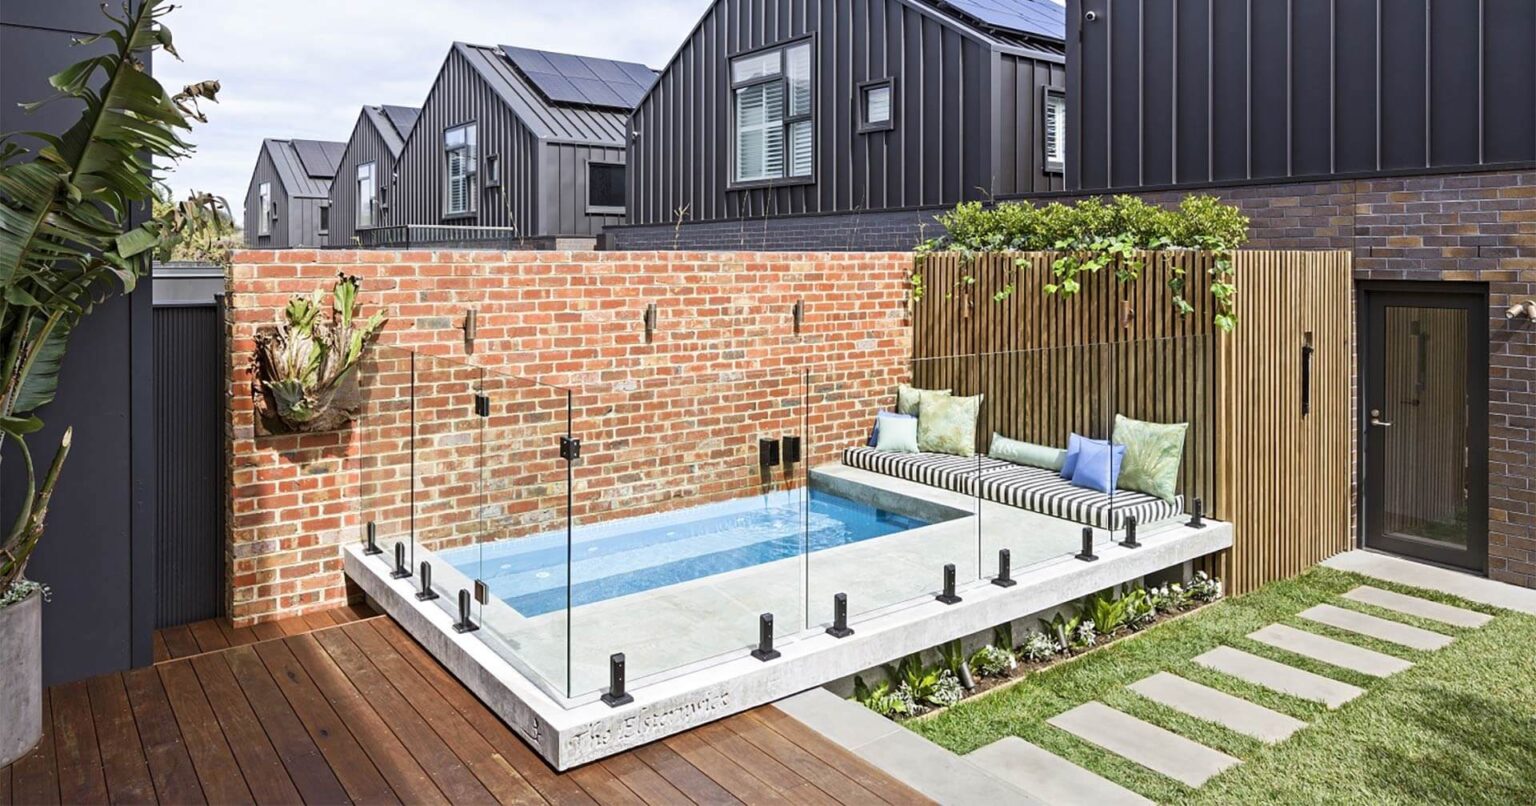 Glass pool fencing Melbourne